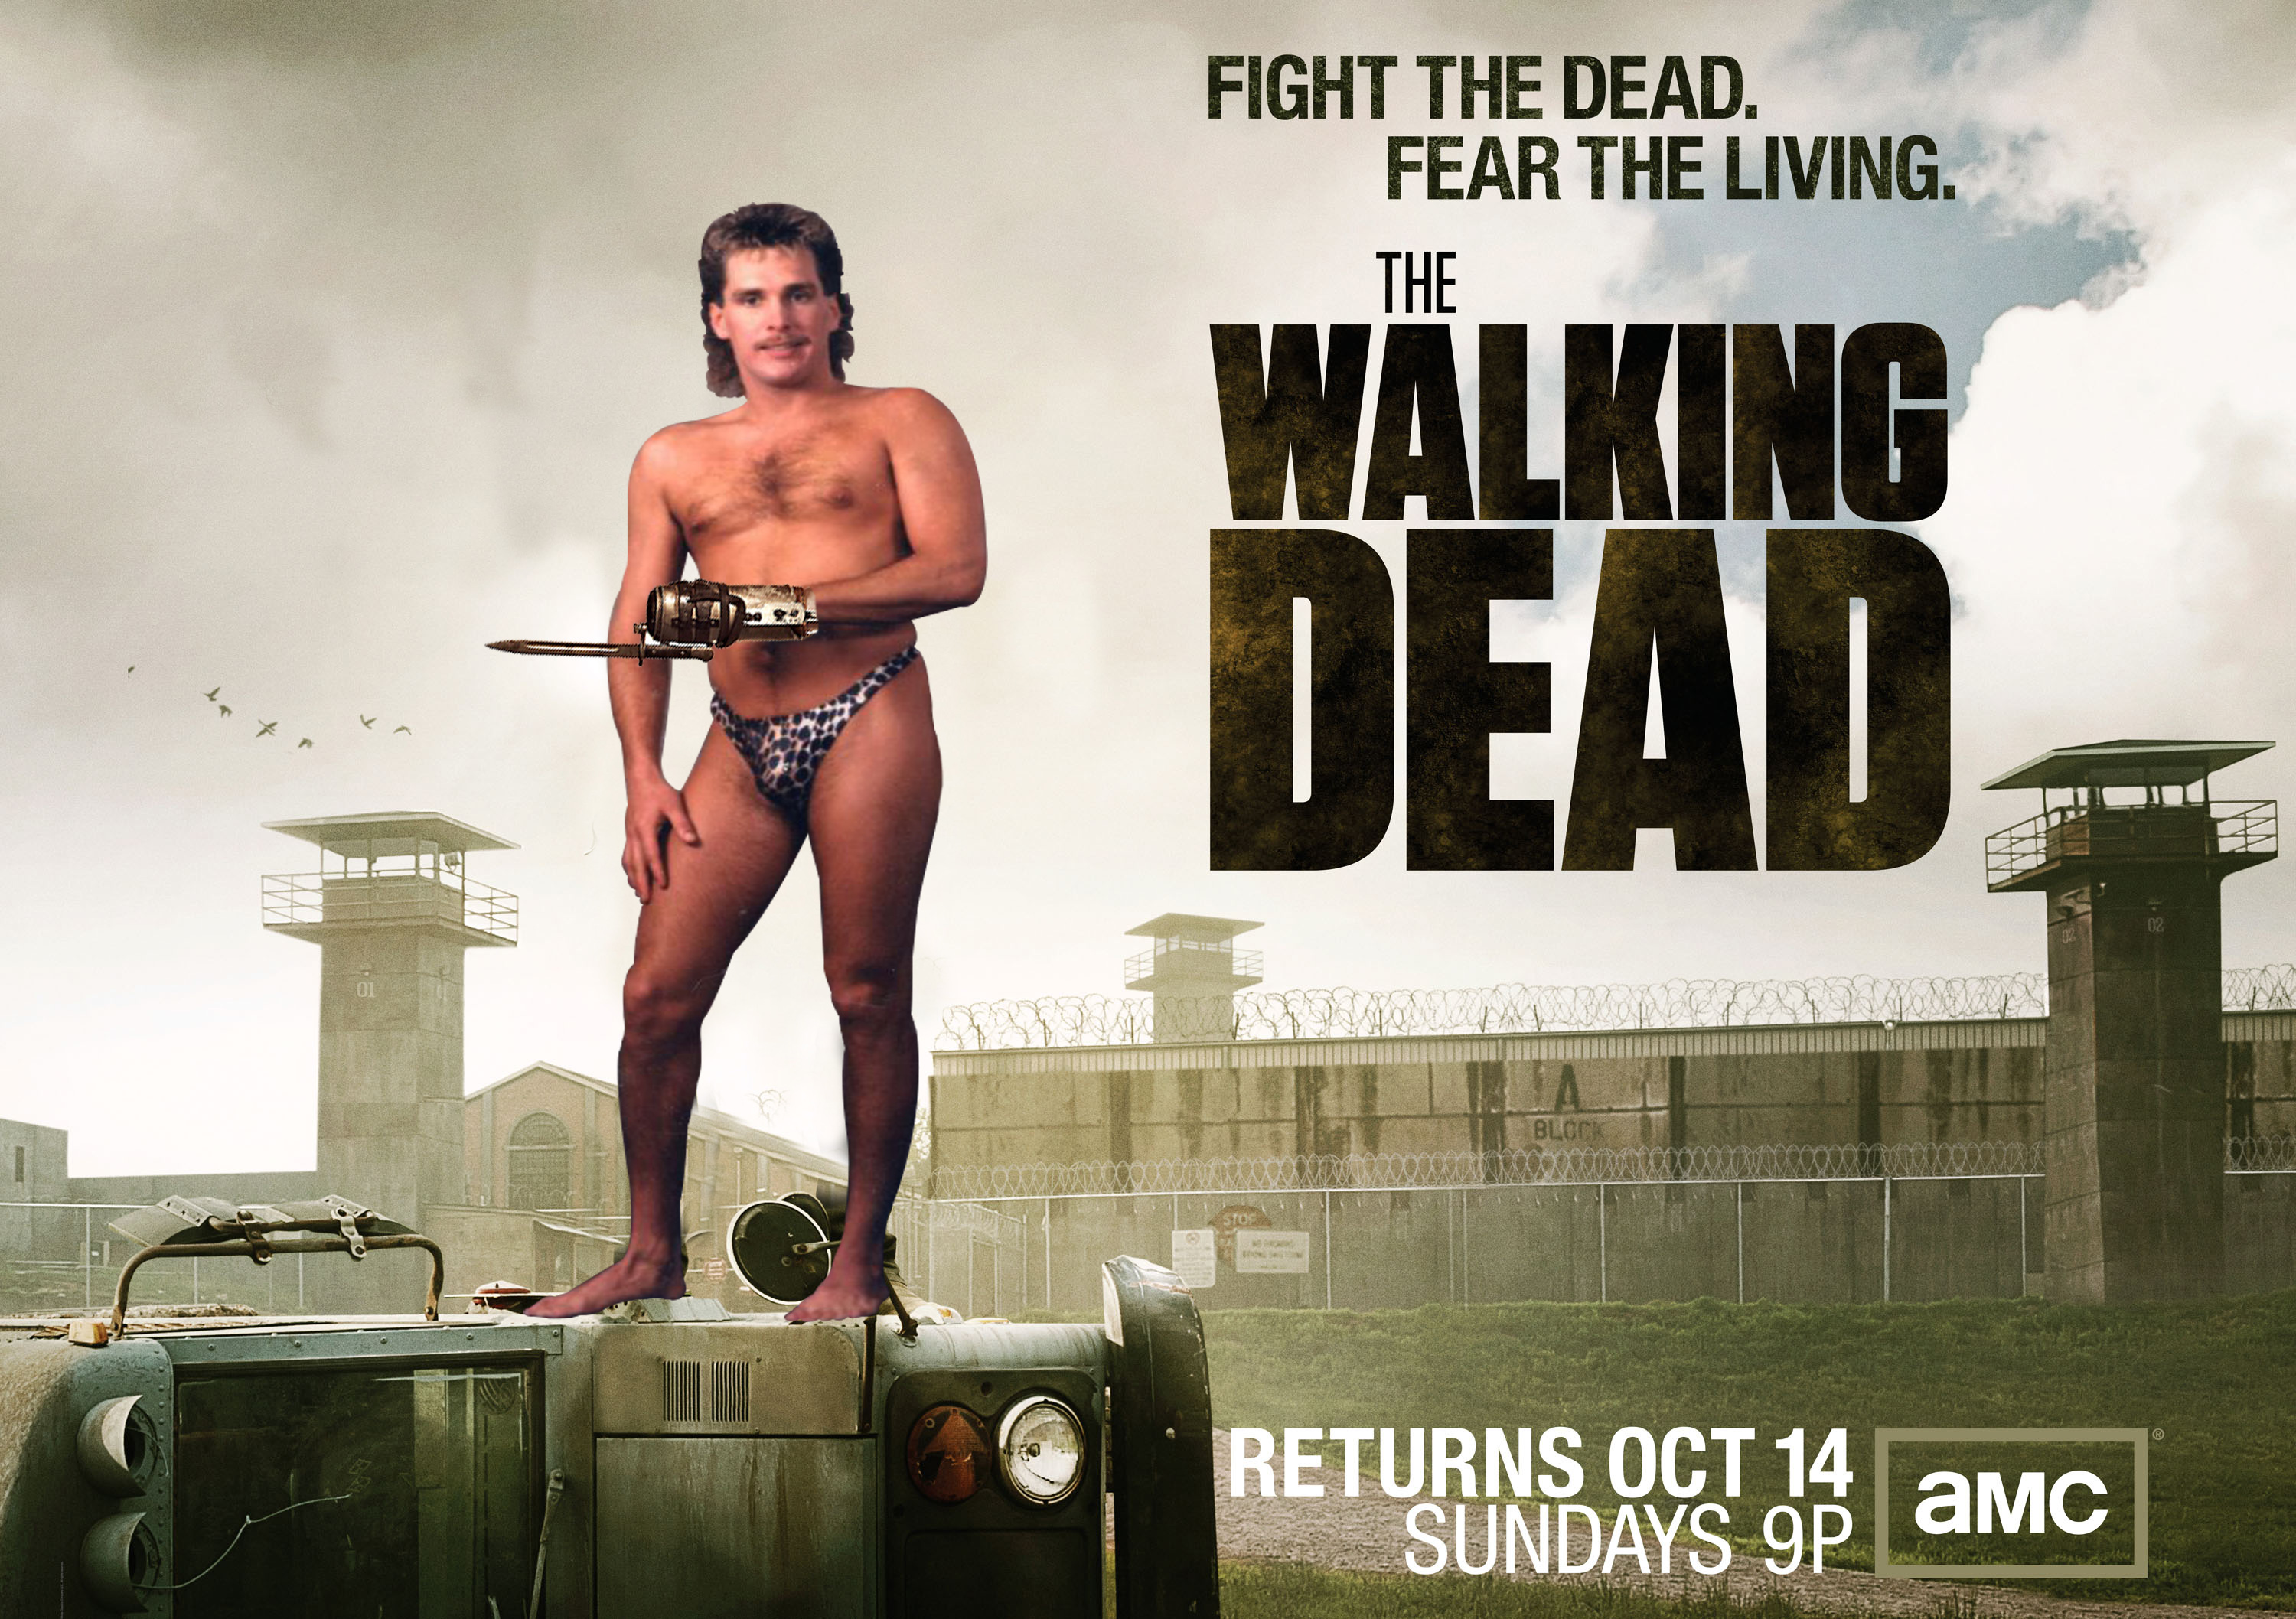 walking dead season 3 poster - Fight The Dead. Fear The Living. The Walking Dead T Ooted Returns Oct 14 Sundays 9P an Amc